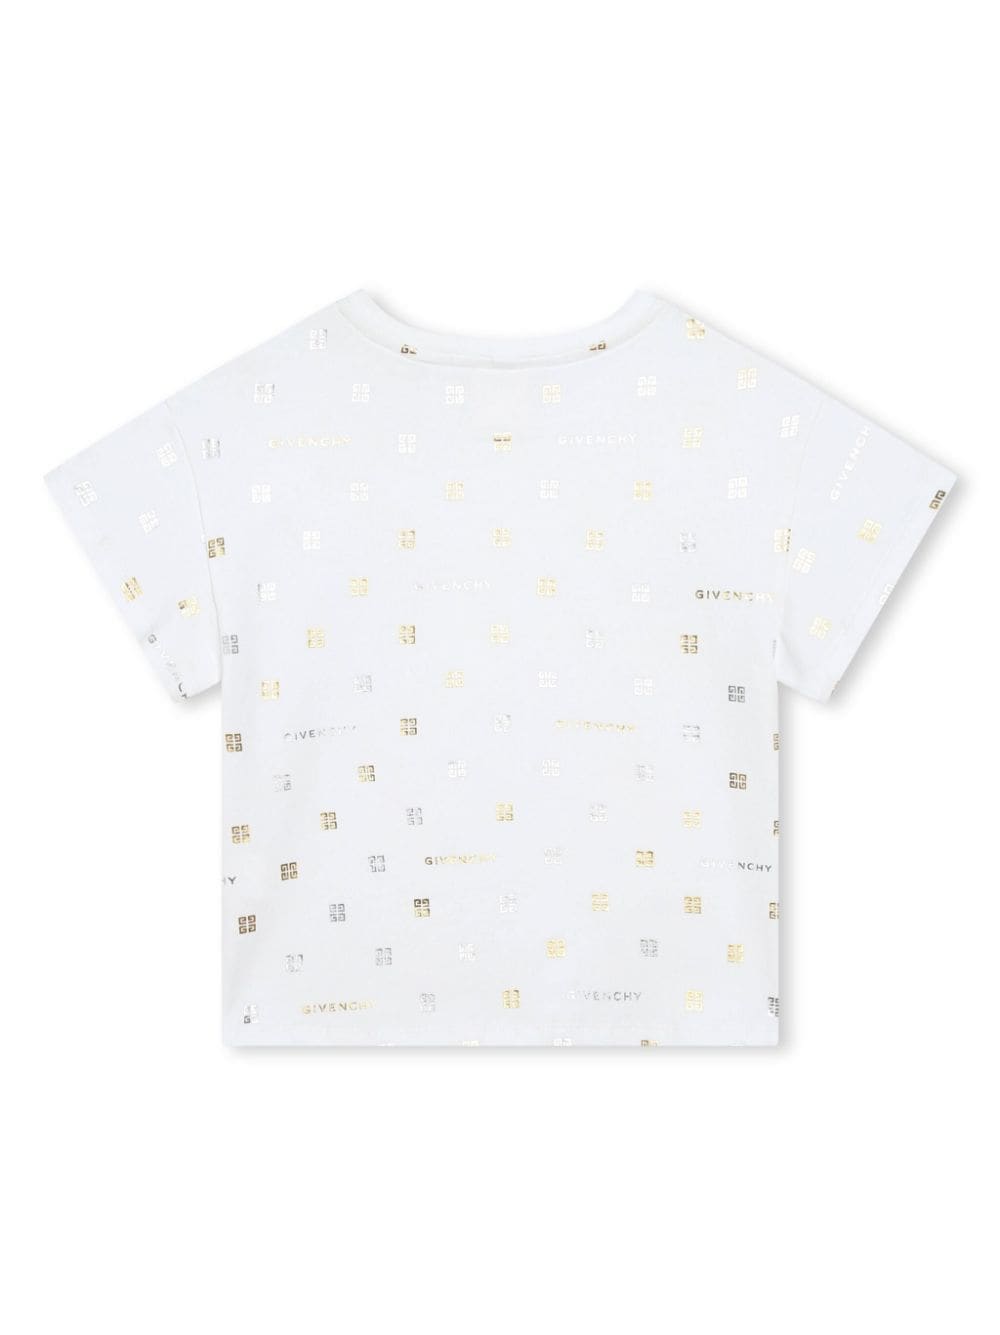 Givenchy Kids t-shirt con stampa